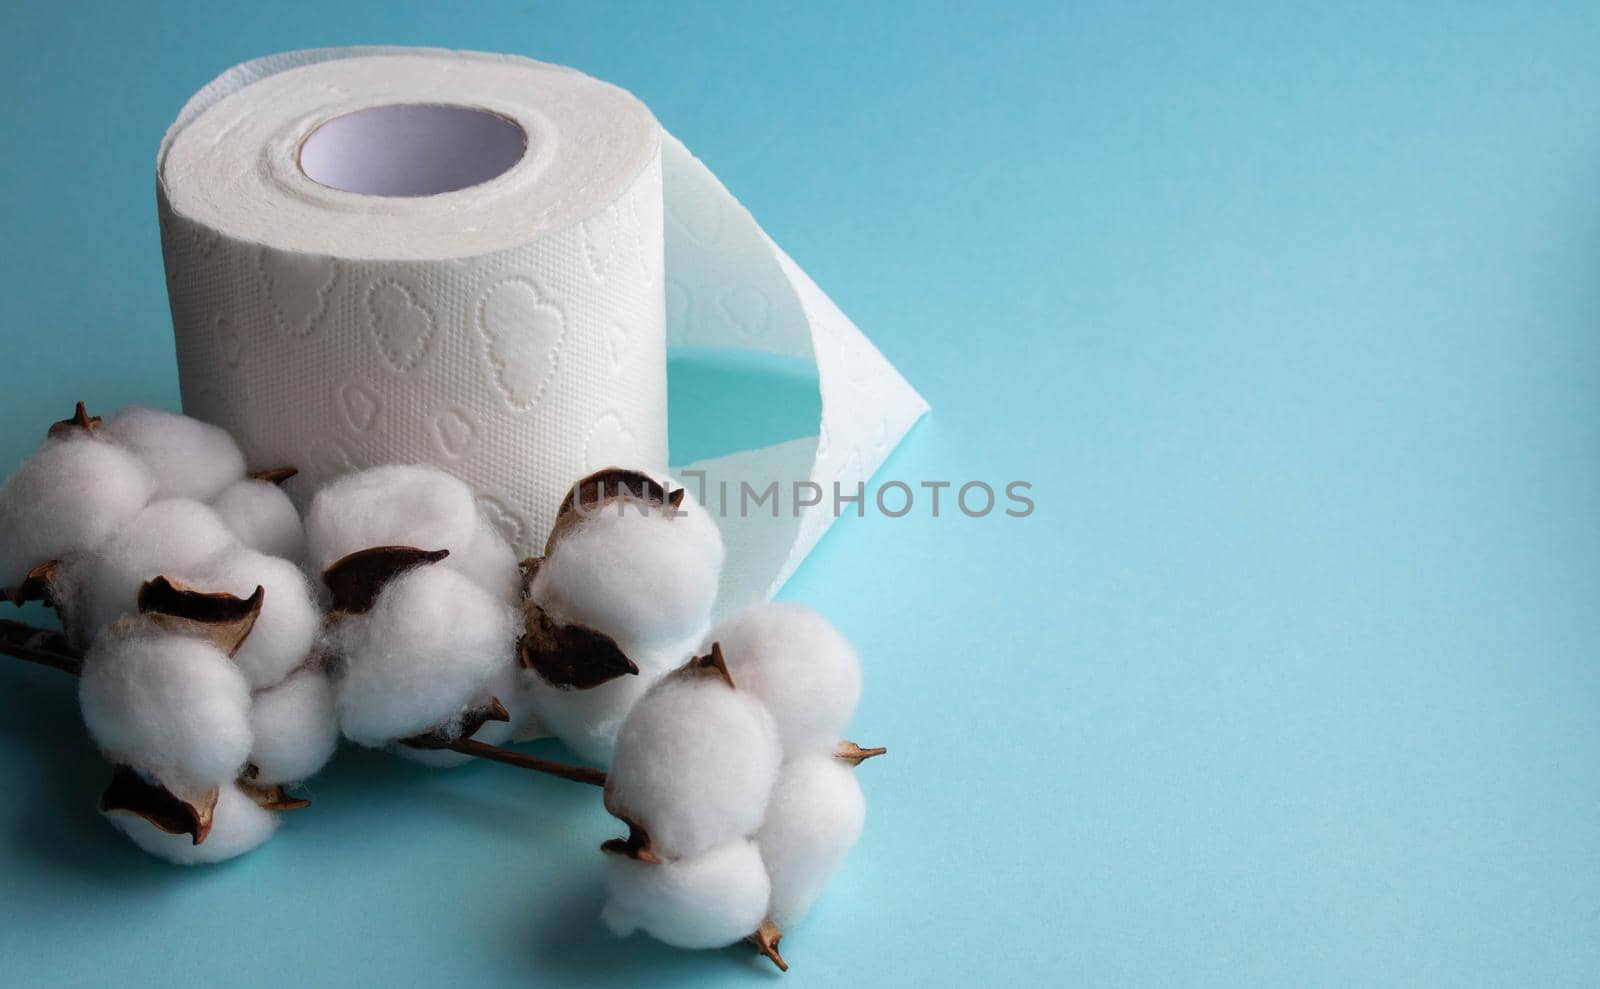 Toilet paper roll isolated on a blue background, with a branch of fluffy cotton flowers.